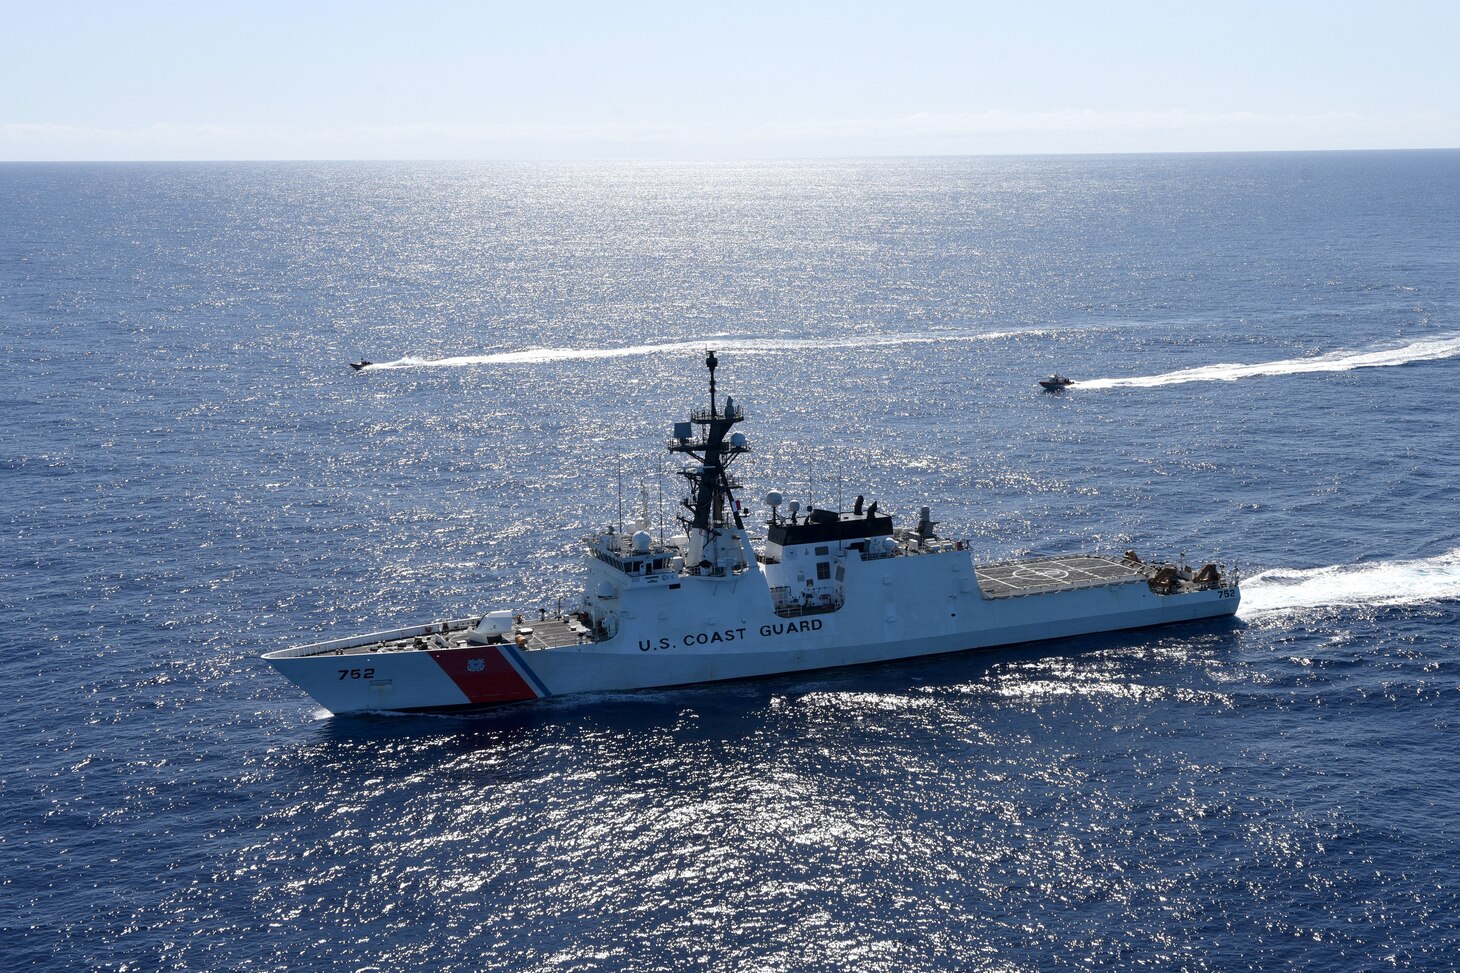 U.S. Coast Guard Cutter Stratton (752) transits the Western Pacific while surface assets conduct training in the ship’s vicinity, west of Hawaii, April 20, 2023. Stratton deployed to conduct collaborative engagements with partner nations’ coast guards and navies for the promotion of a free and open Indo-Pacific.